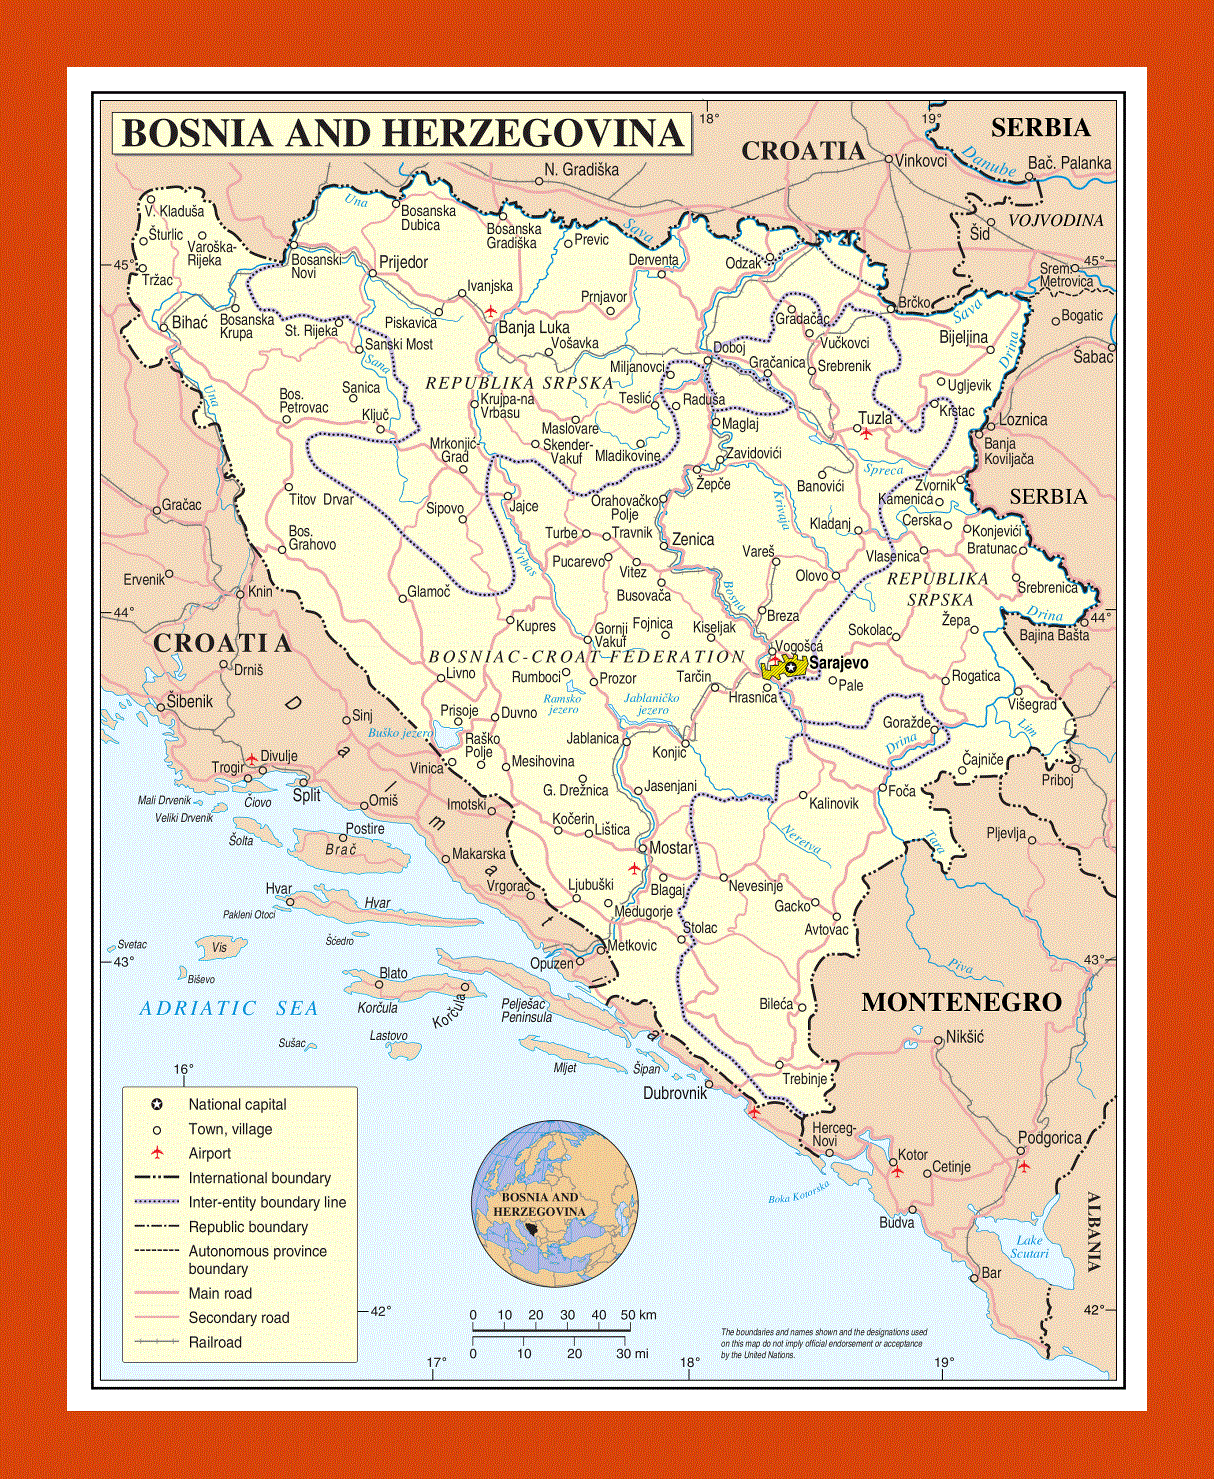 Political and administrative map of Bosnia and Herzegovina